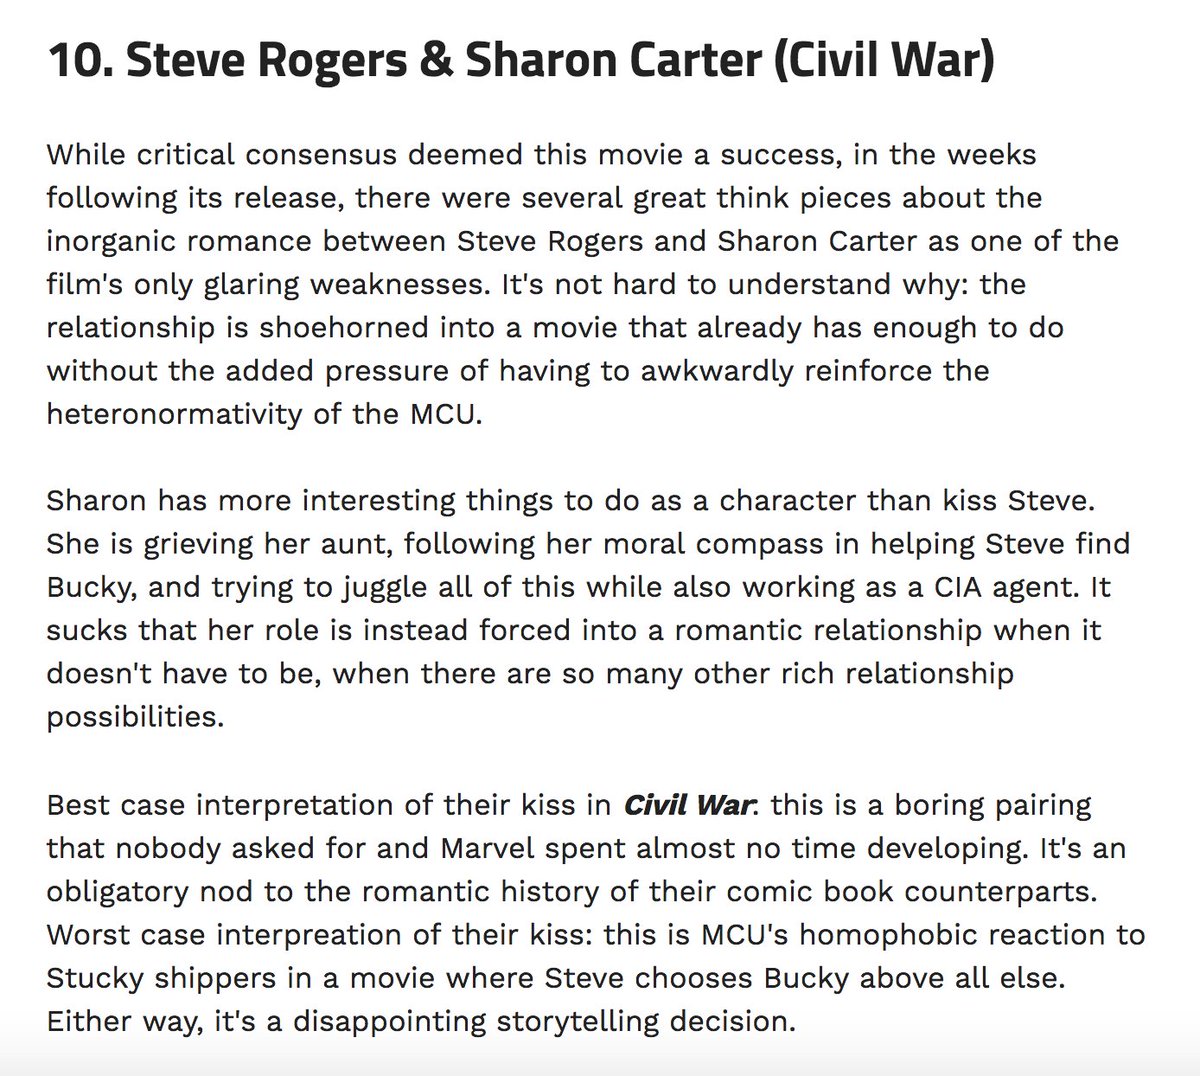  Stevesharon in the MCU is underdeveloped & borderline a disservice to all characters involved. That’s true WHETHER OR NOT you ship Stevebucky, & something even mainstream media has covered extensively.